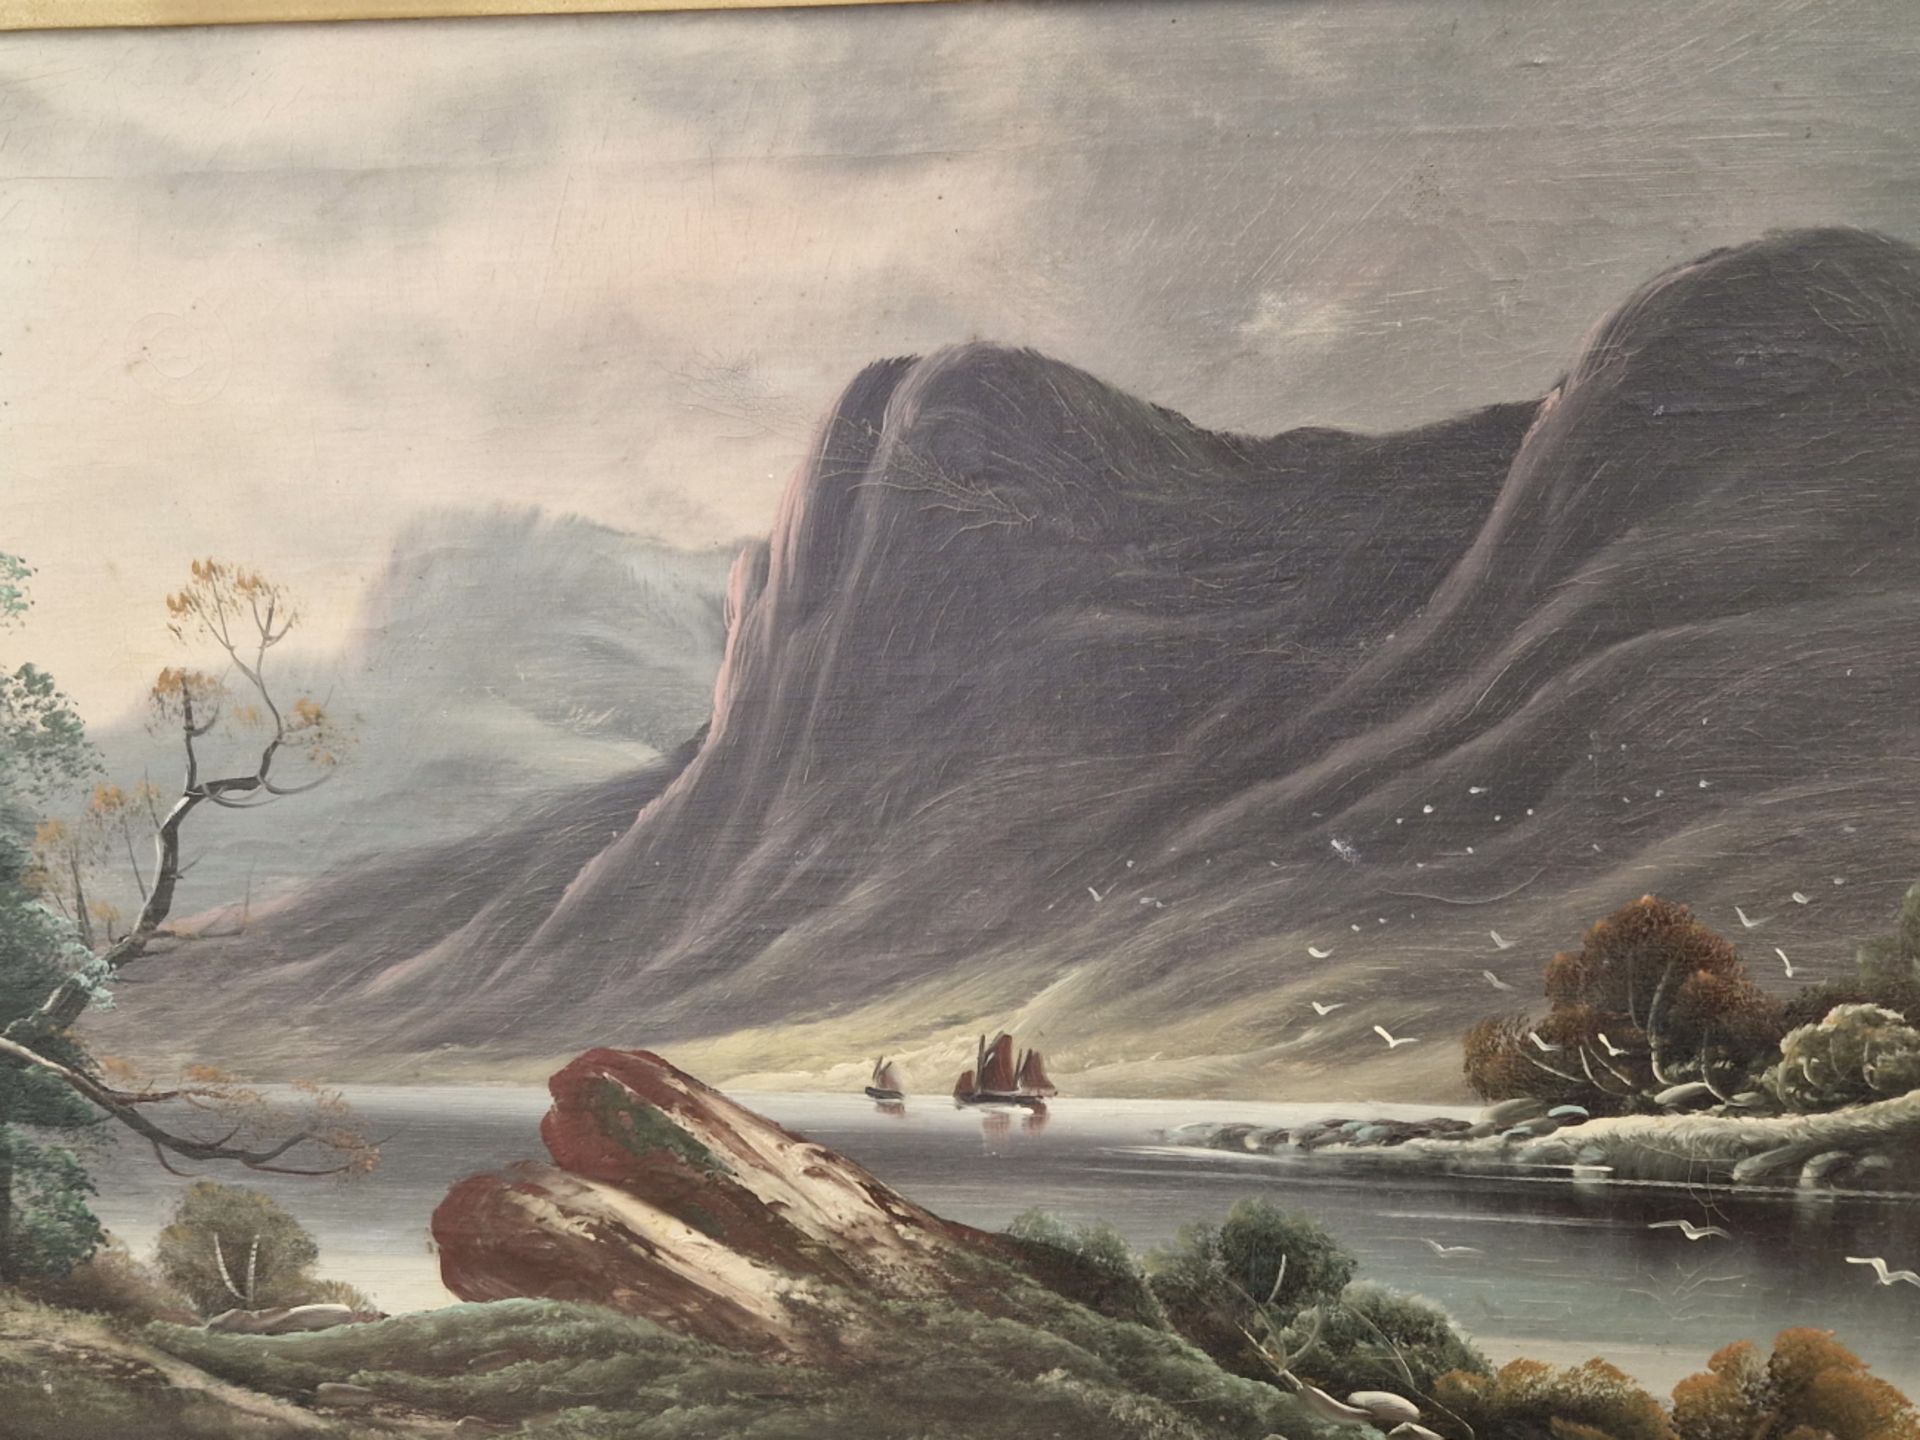 19th/20th CENTURY ENGLISH SCHOOL A MOUNTAINOUS LAKE SCENE, SIGNED INDISTINCTLY, OIL ON CANVAS. 47